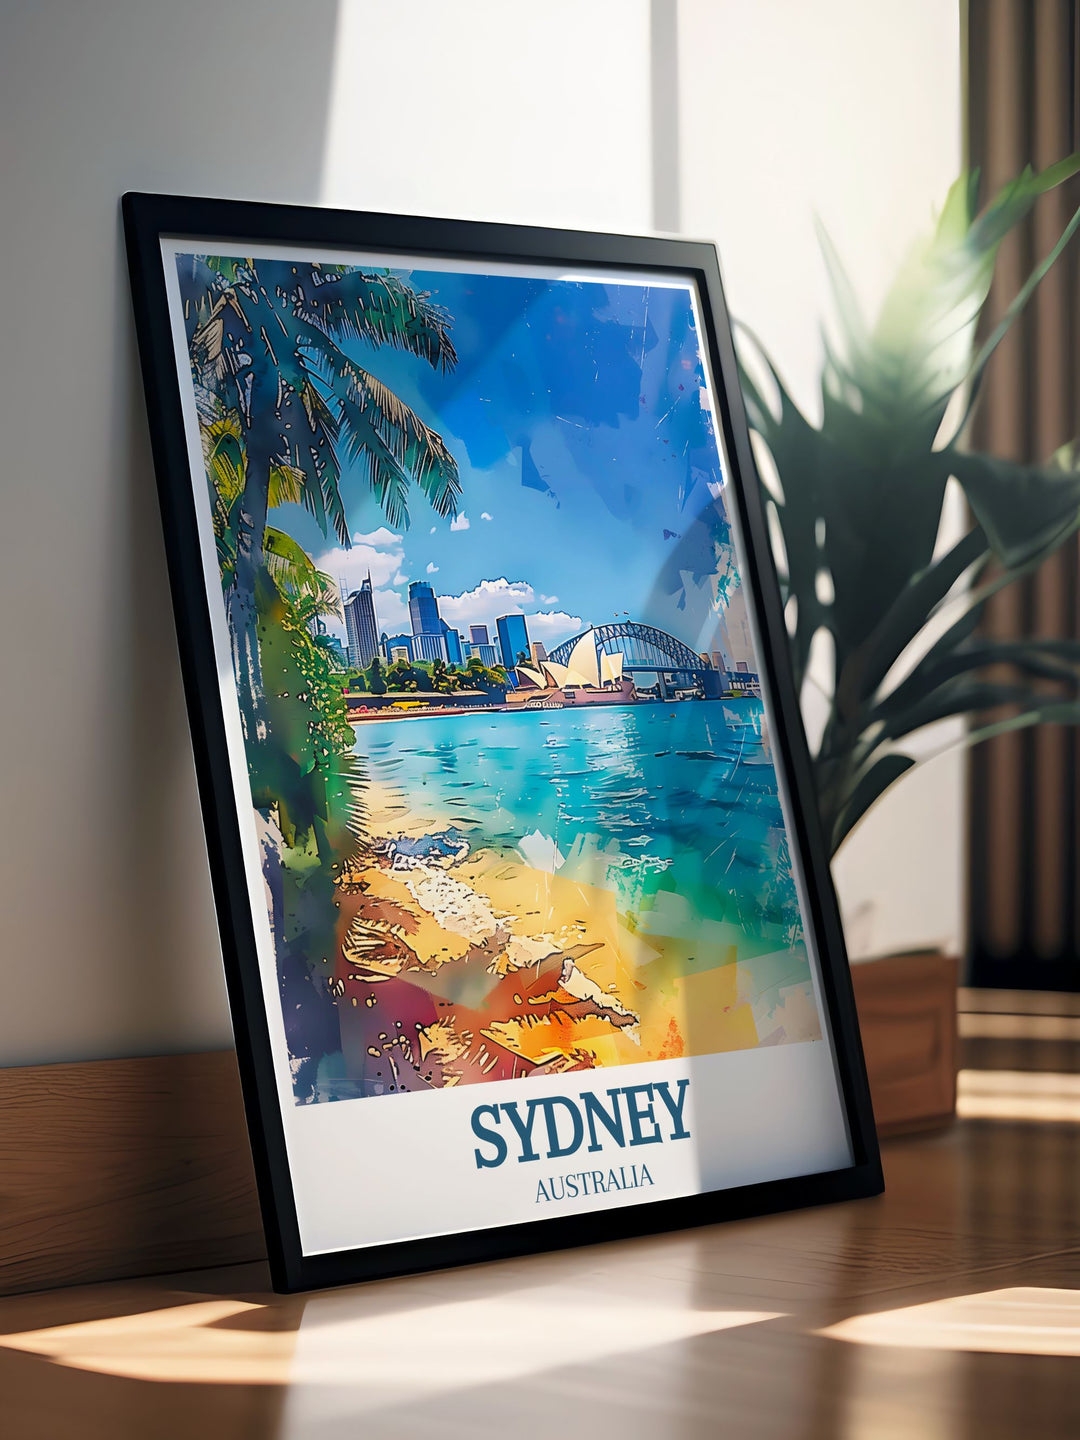 Elegant Sydney Harbour Bridge and Sydney Opera House vintage print perfect for home decor or as a thoughtful gift showcasing the beauty and majesty of Sydneys most famous landmarks in a timeless and sophisticated design